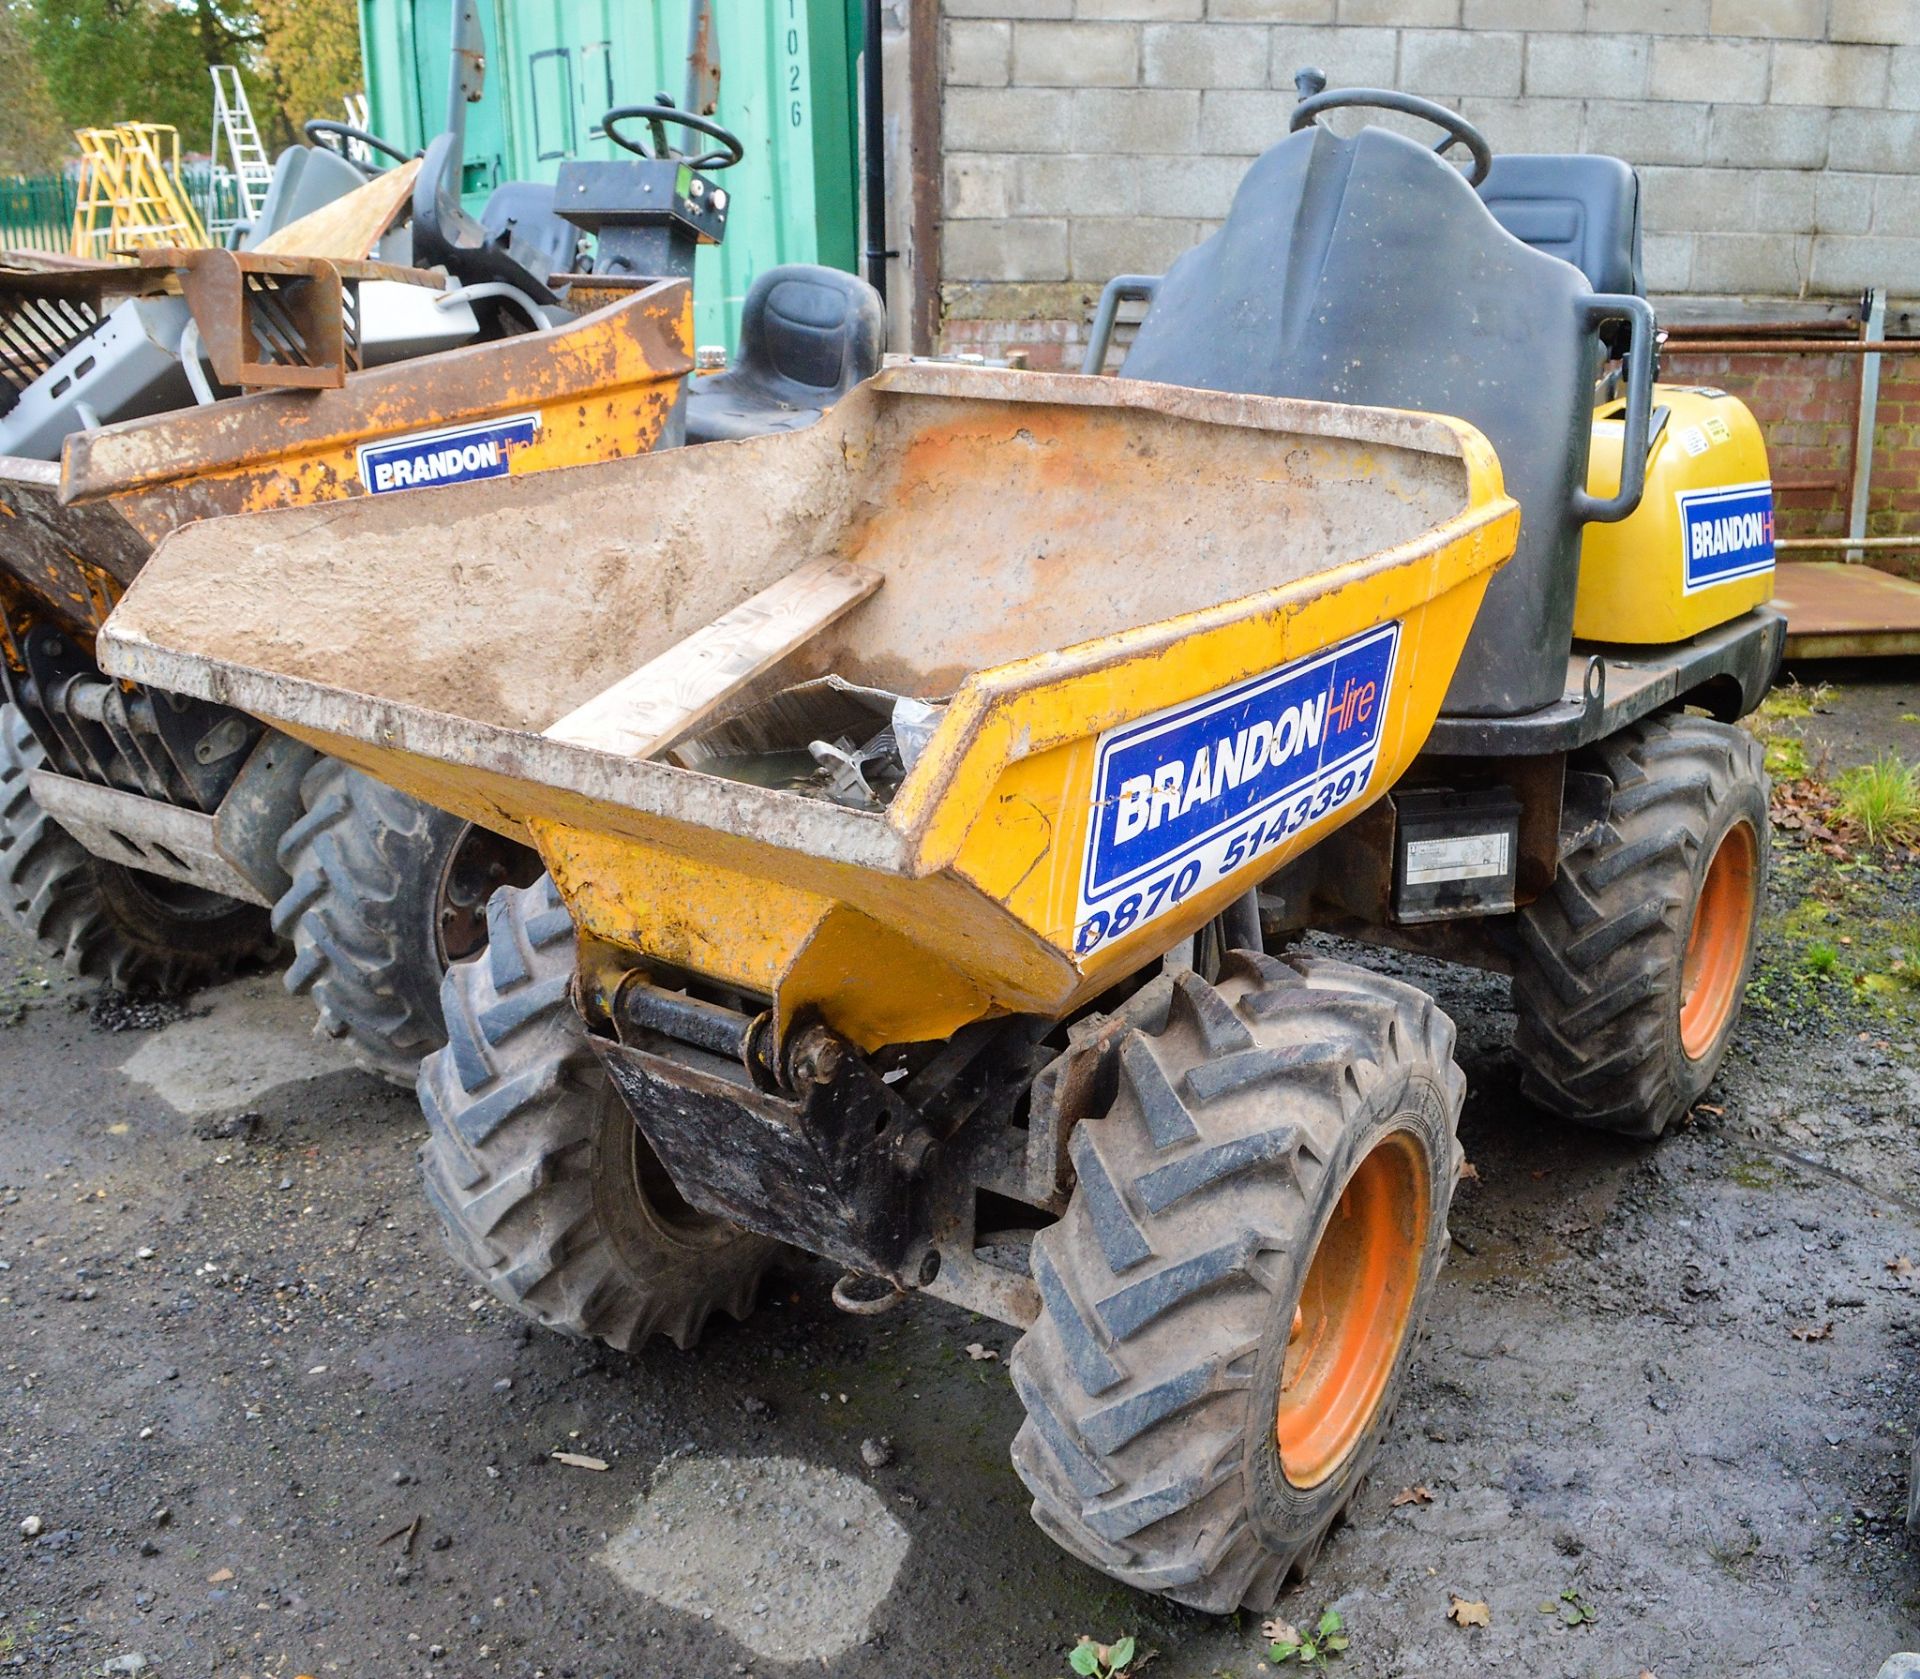 Lifton 850 hi tip dumper Year: 2002 S/N: 382 Recorded Hours: 1881 MG55 ** Machine does not start and - Image 2 of 5